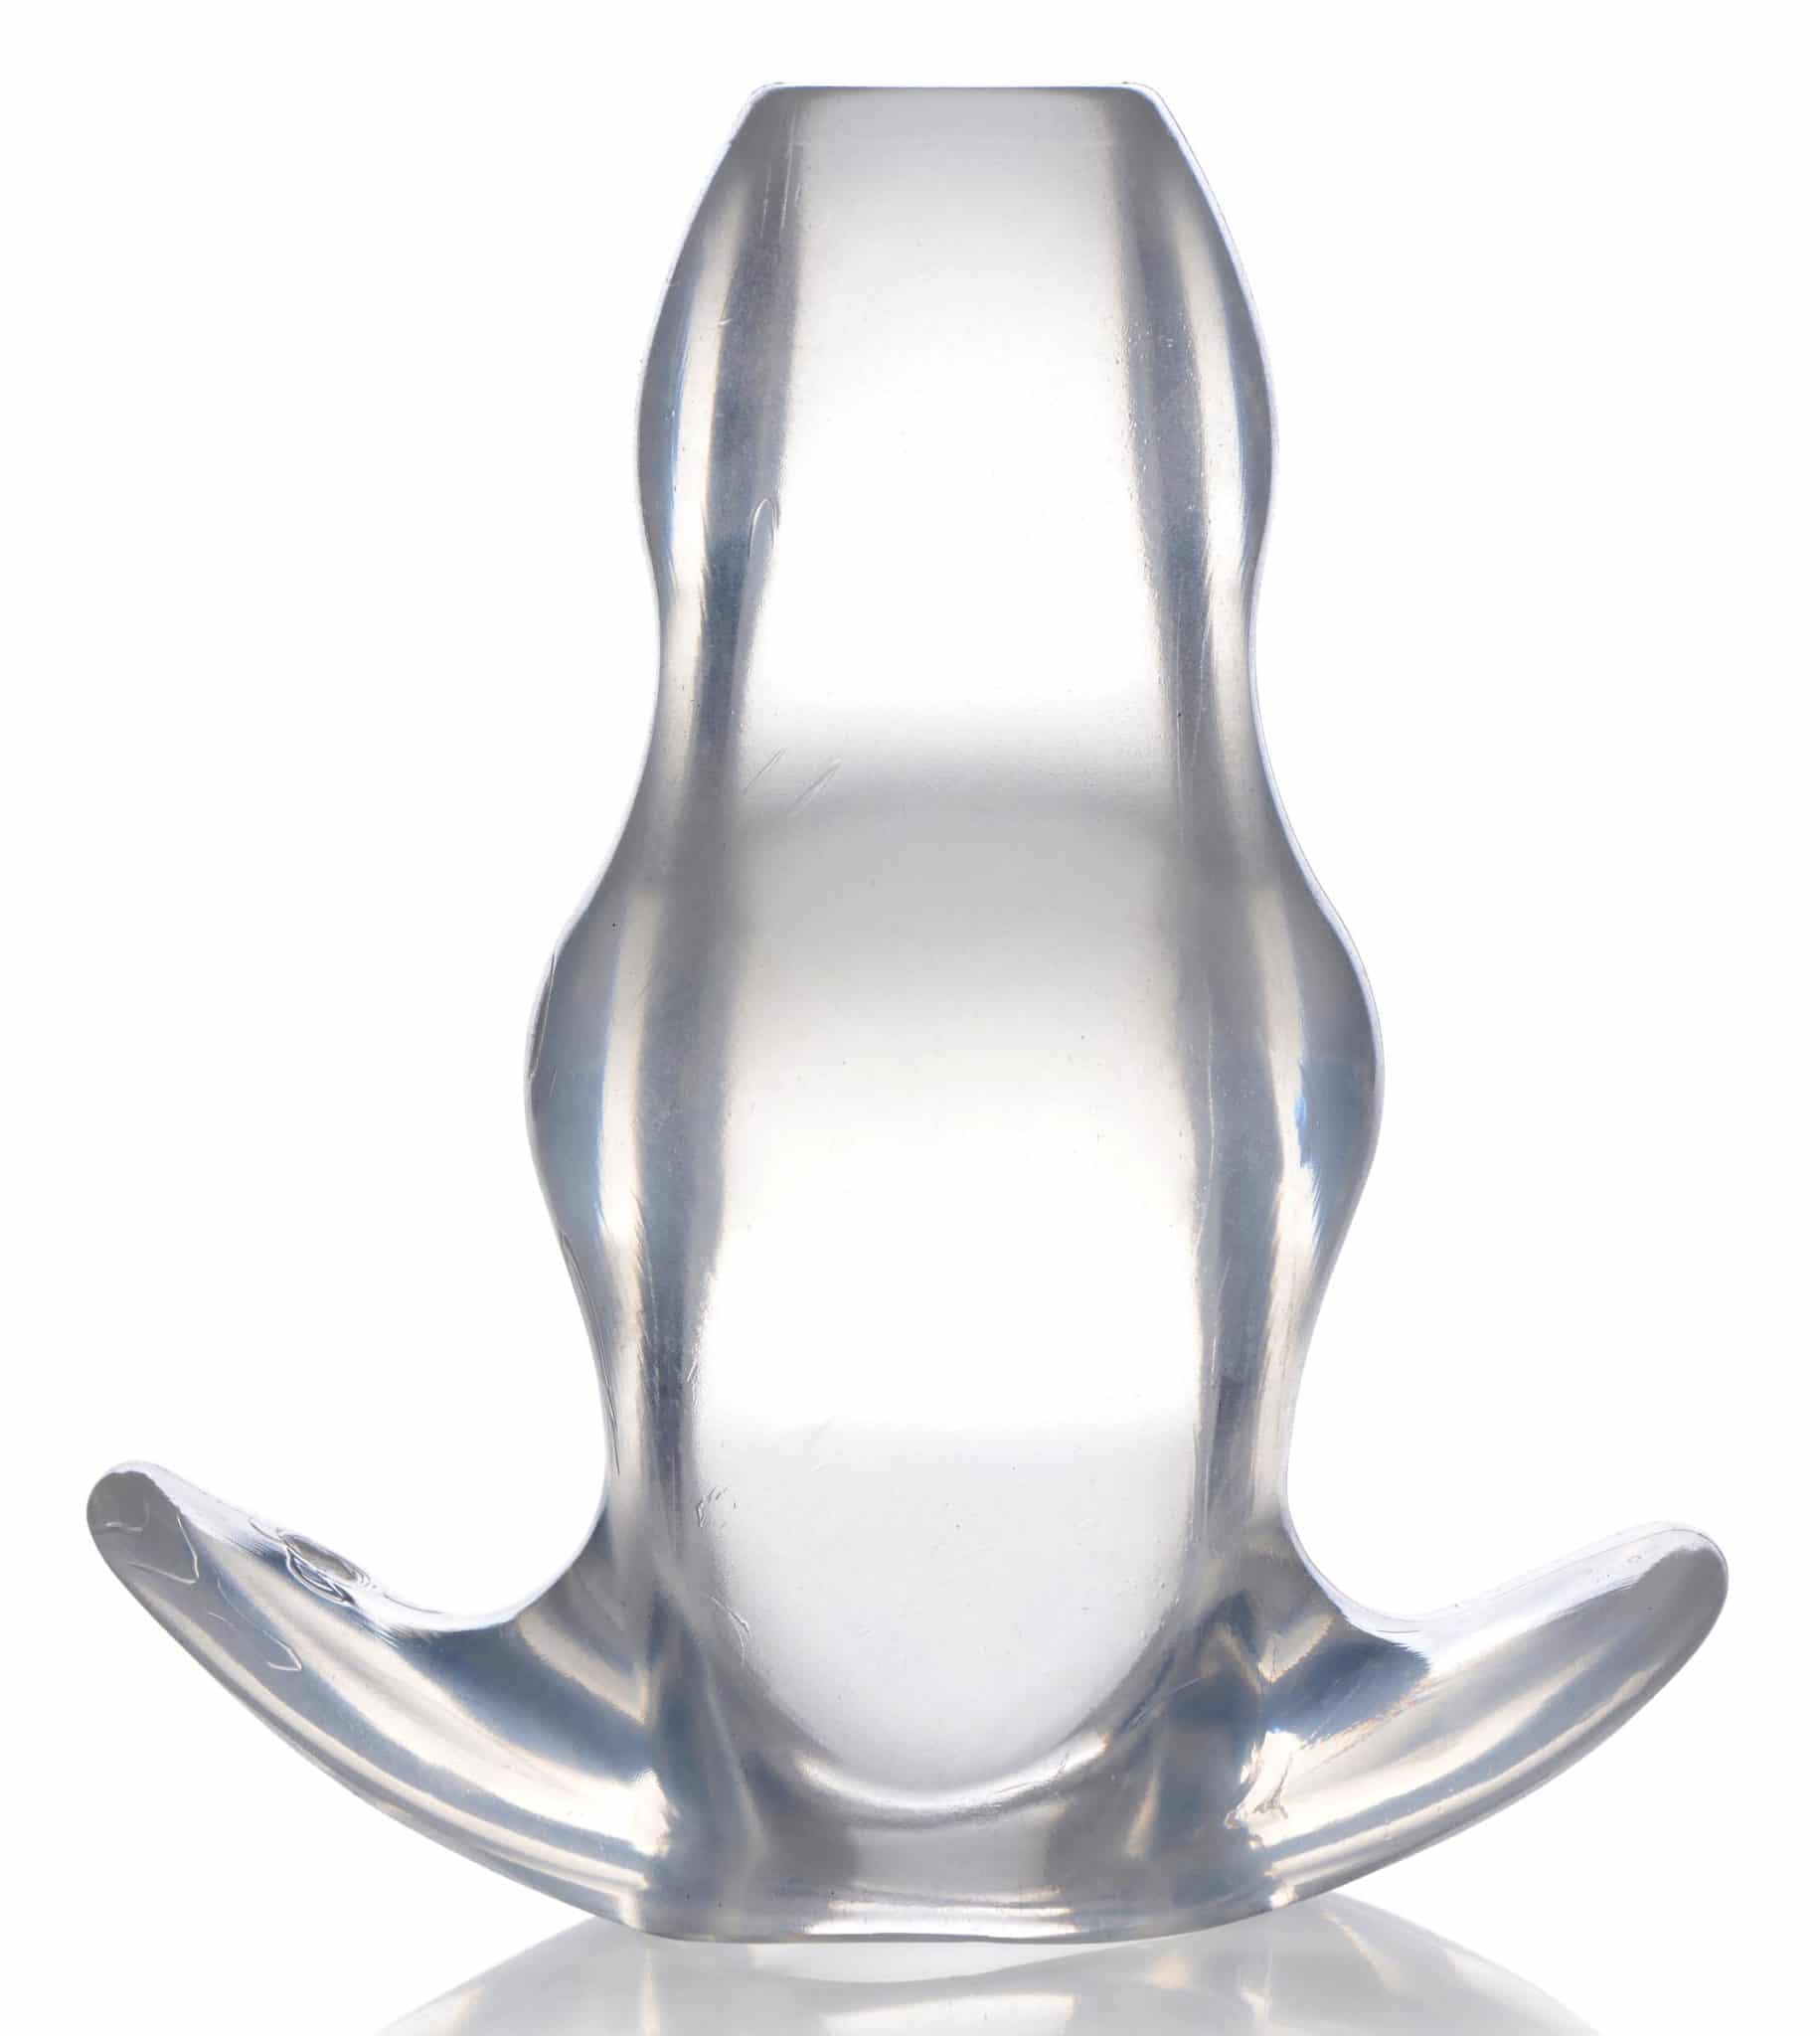 Clear View Hollow Anal Plug – XL